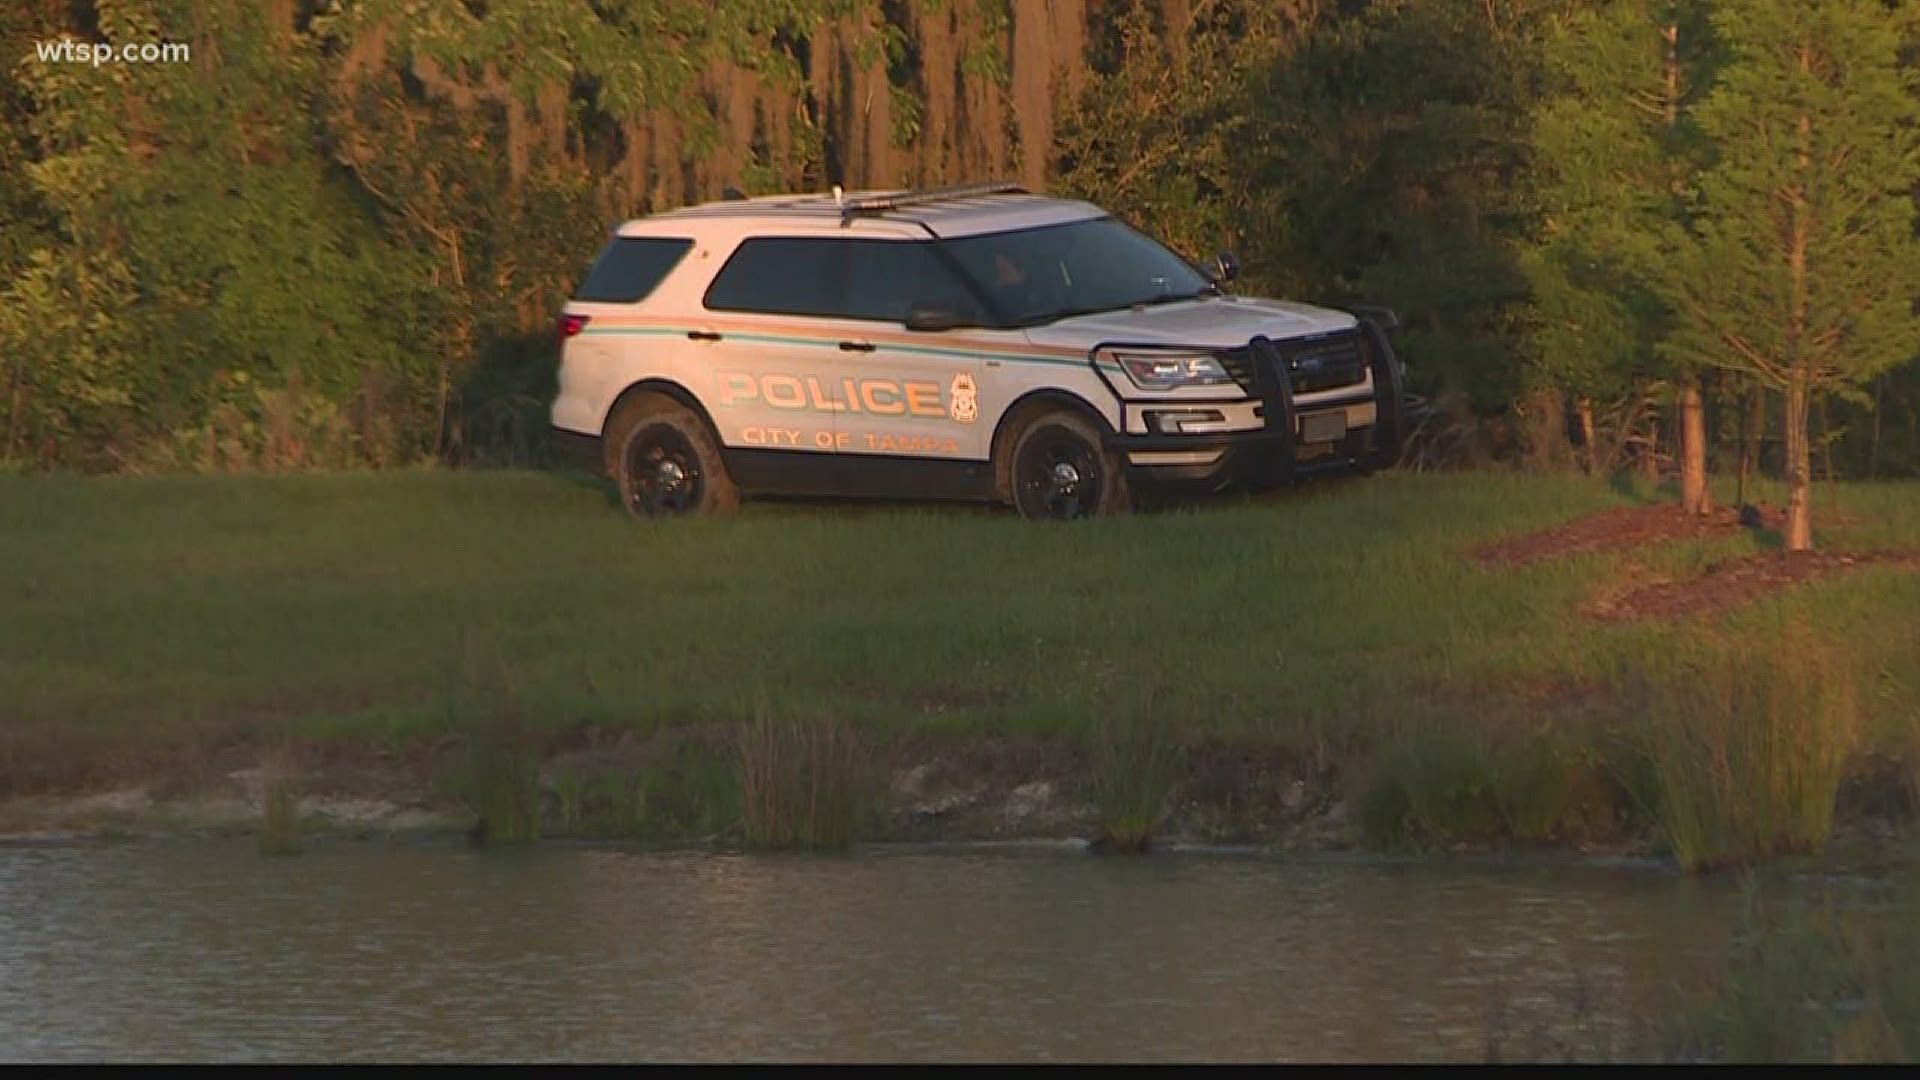 Police searched the neighborhood with dozens of volunteers, two bloodhounds and air service. Divers were also launched to search a lake near the child's home.